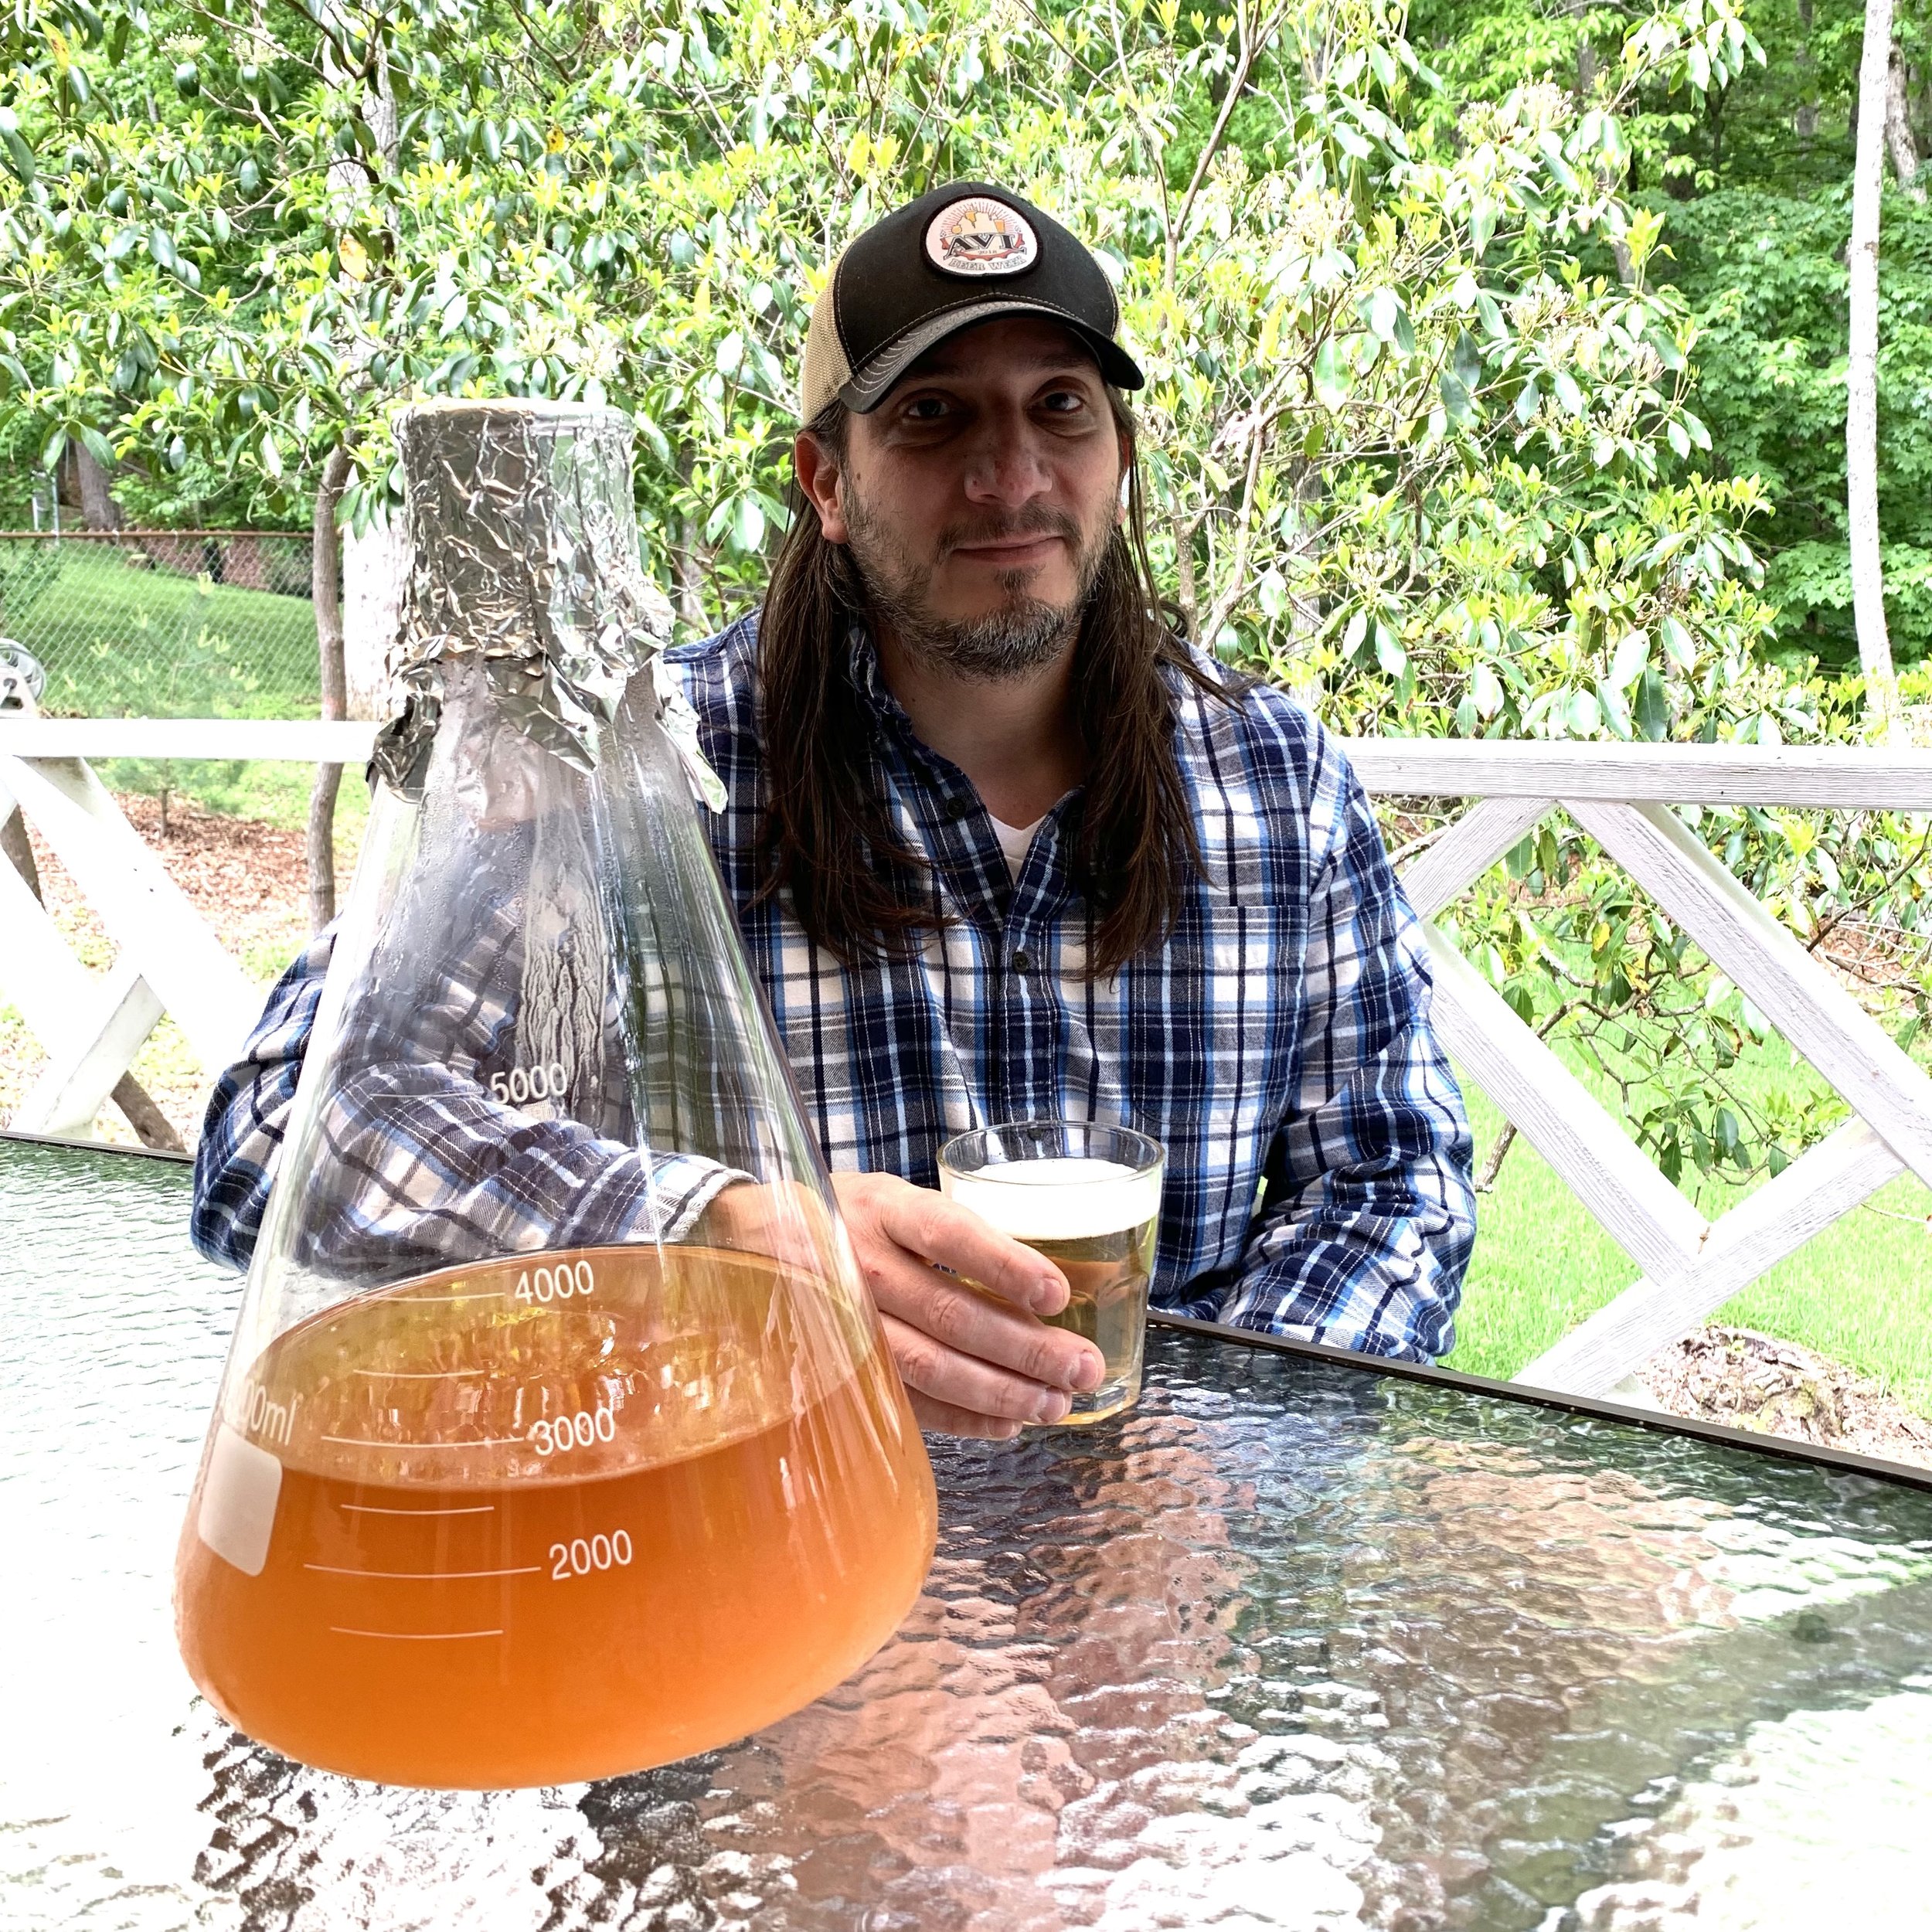  Homebrewer David Maida enjoys the company of a yeast starter culture and a finished lager. Maida partners with specialized yeast strains to brew about a dozen beers a year.  Image credit: Laura Elizabeth Palermo. 